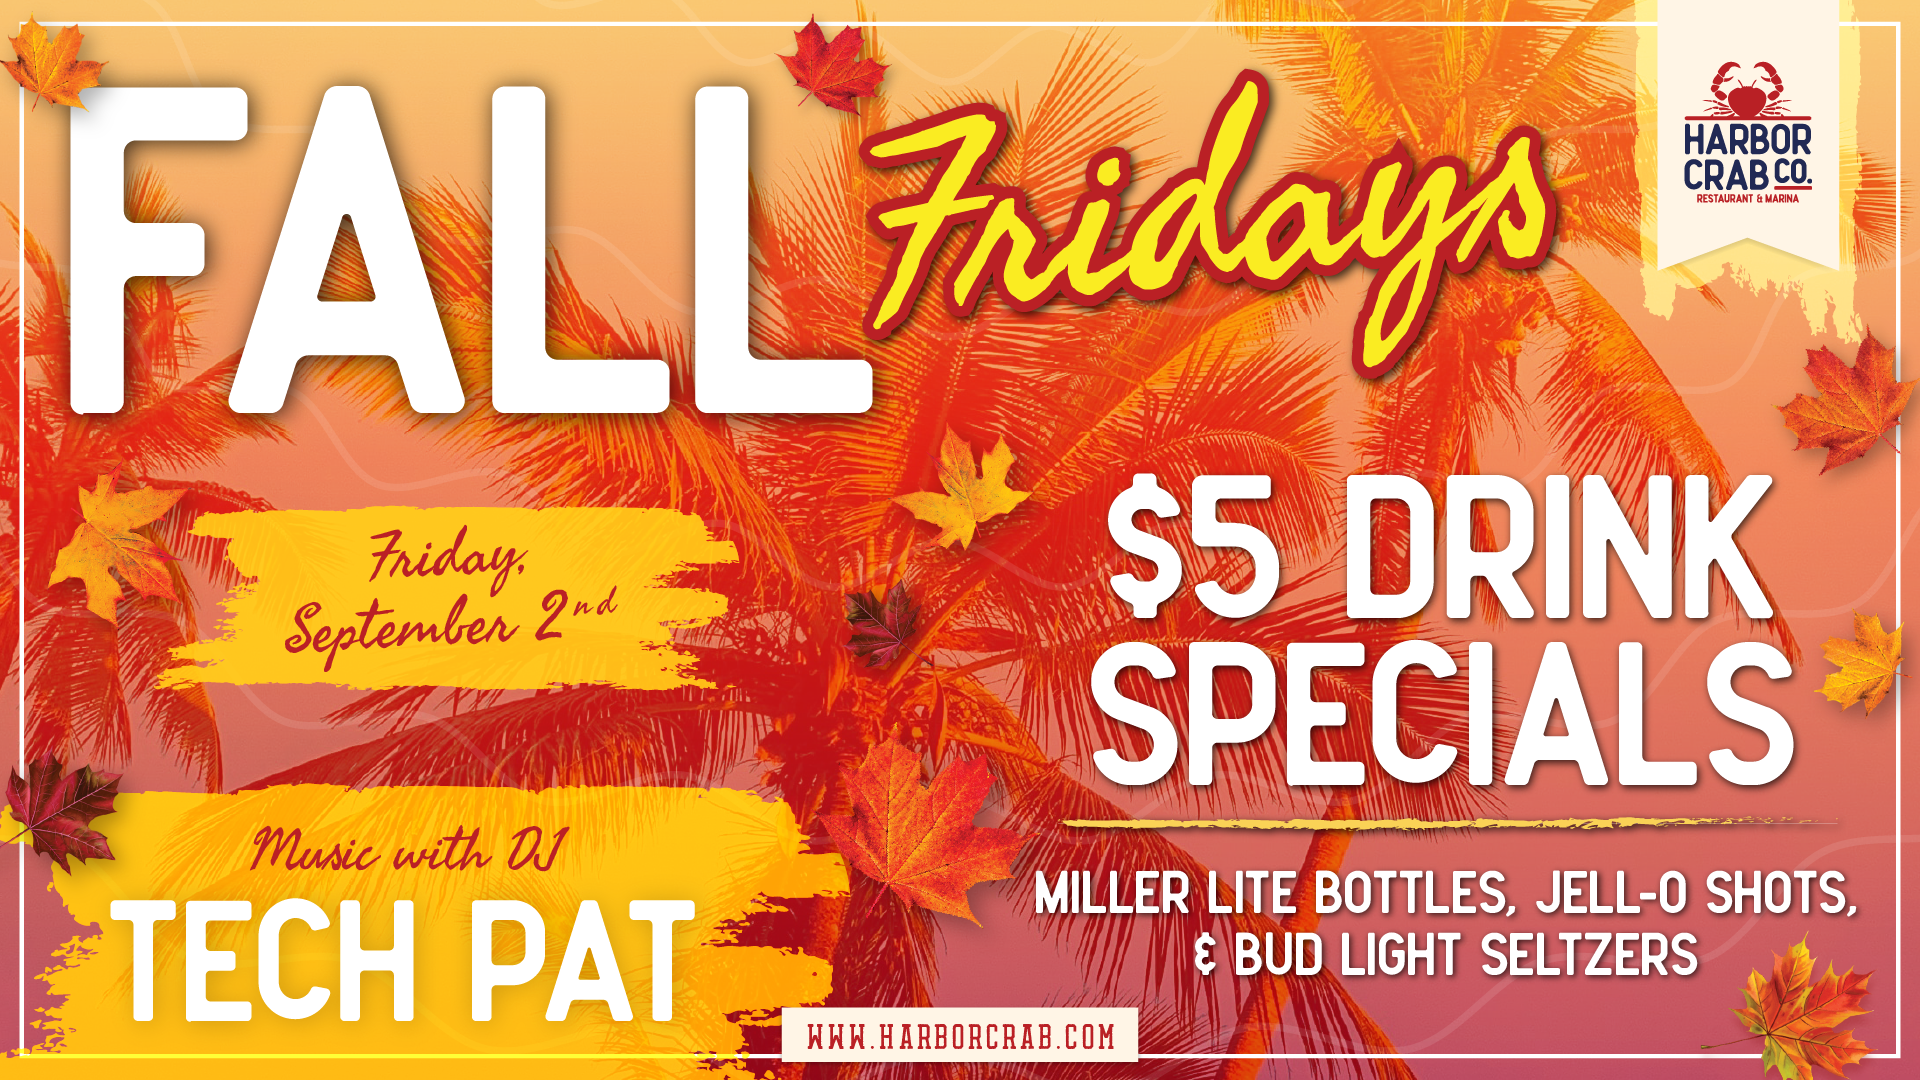 Fall Friday on September 2nd with DJ Tech Pat